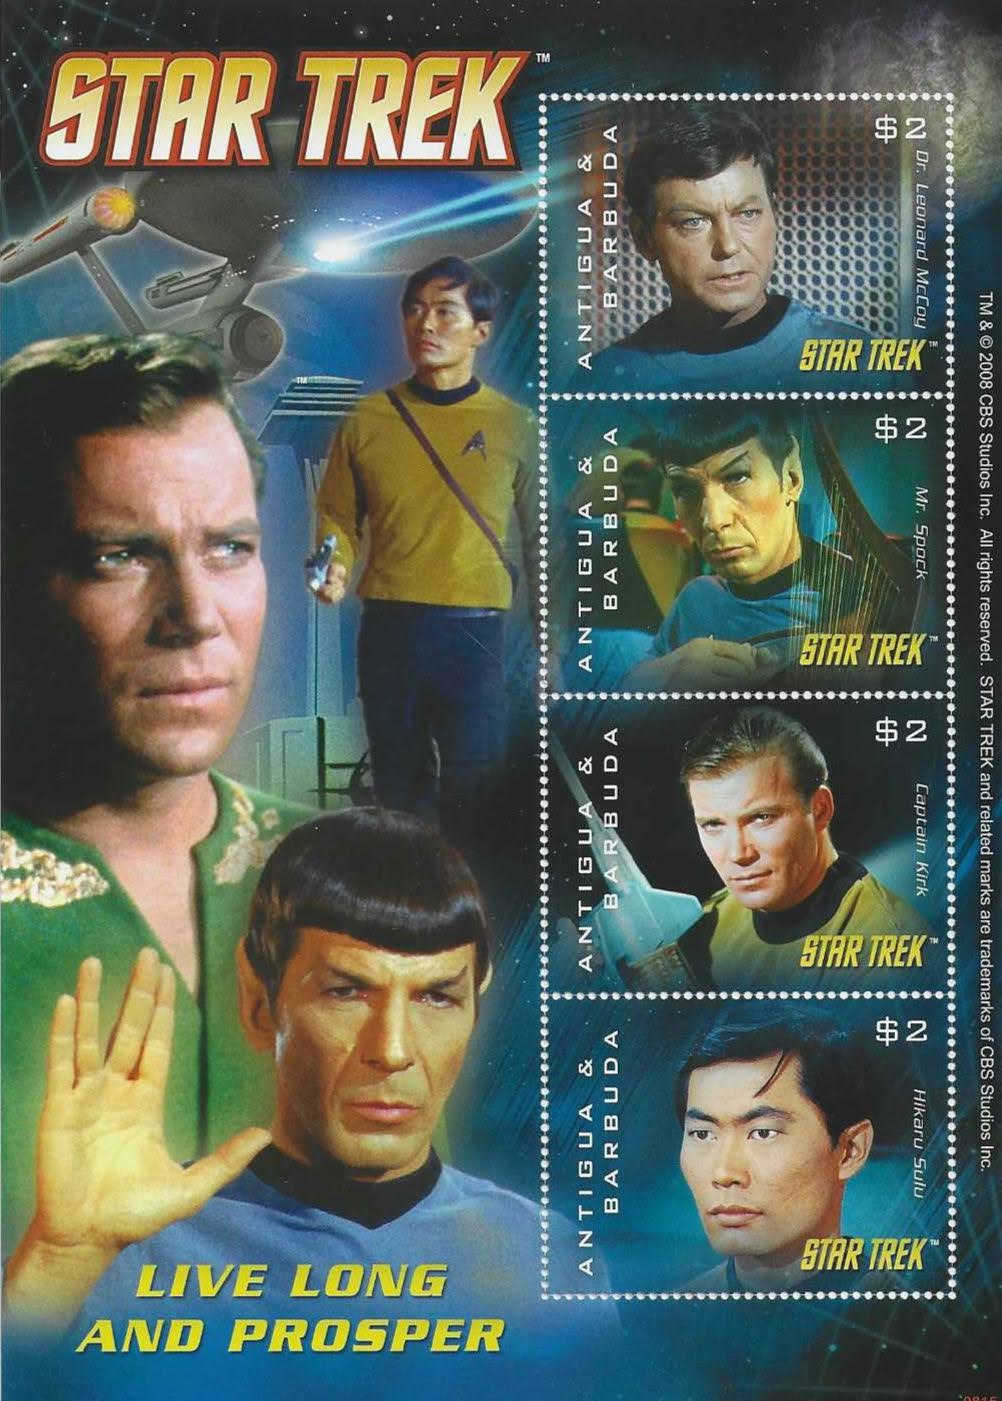 Star Trek stamps from Antigua and Barbuda